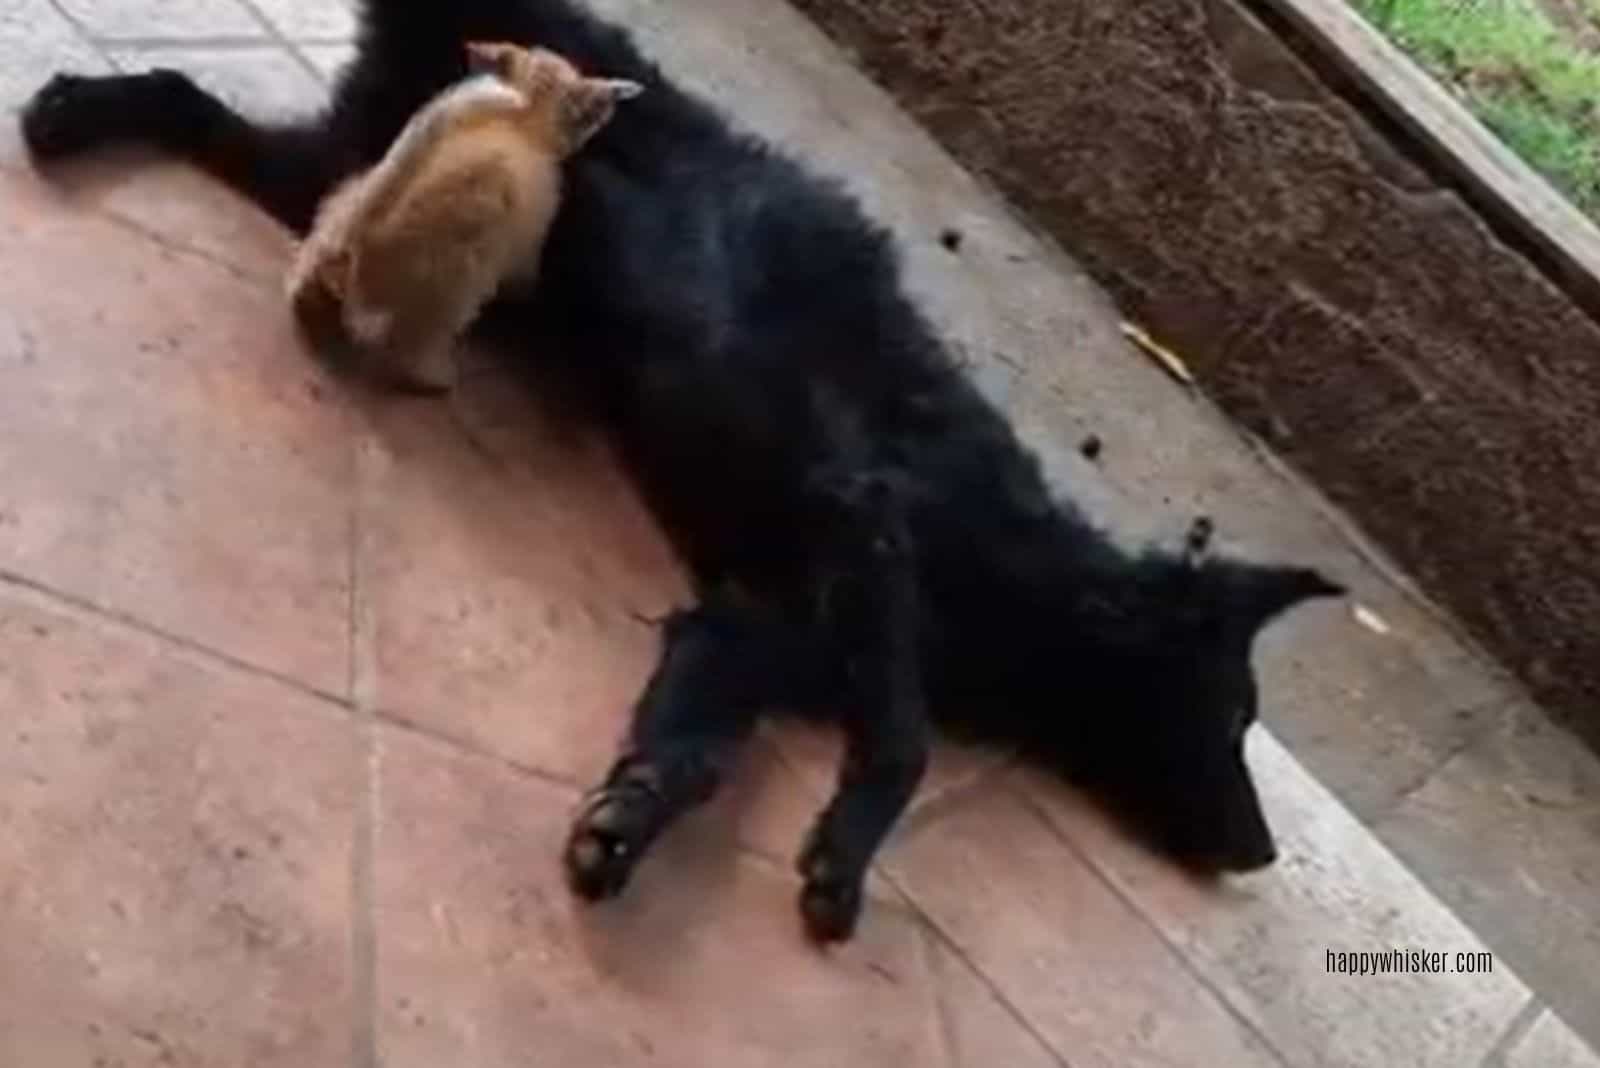 kitty trying to get some milk from dog